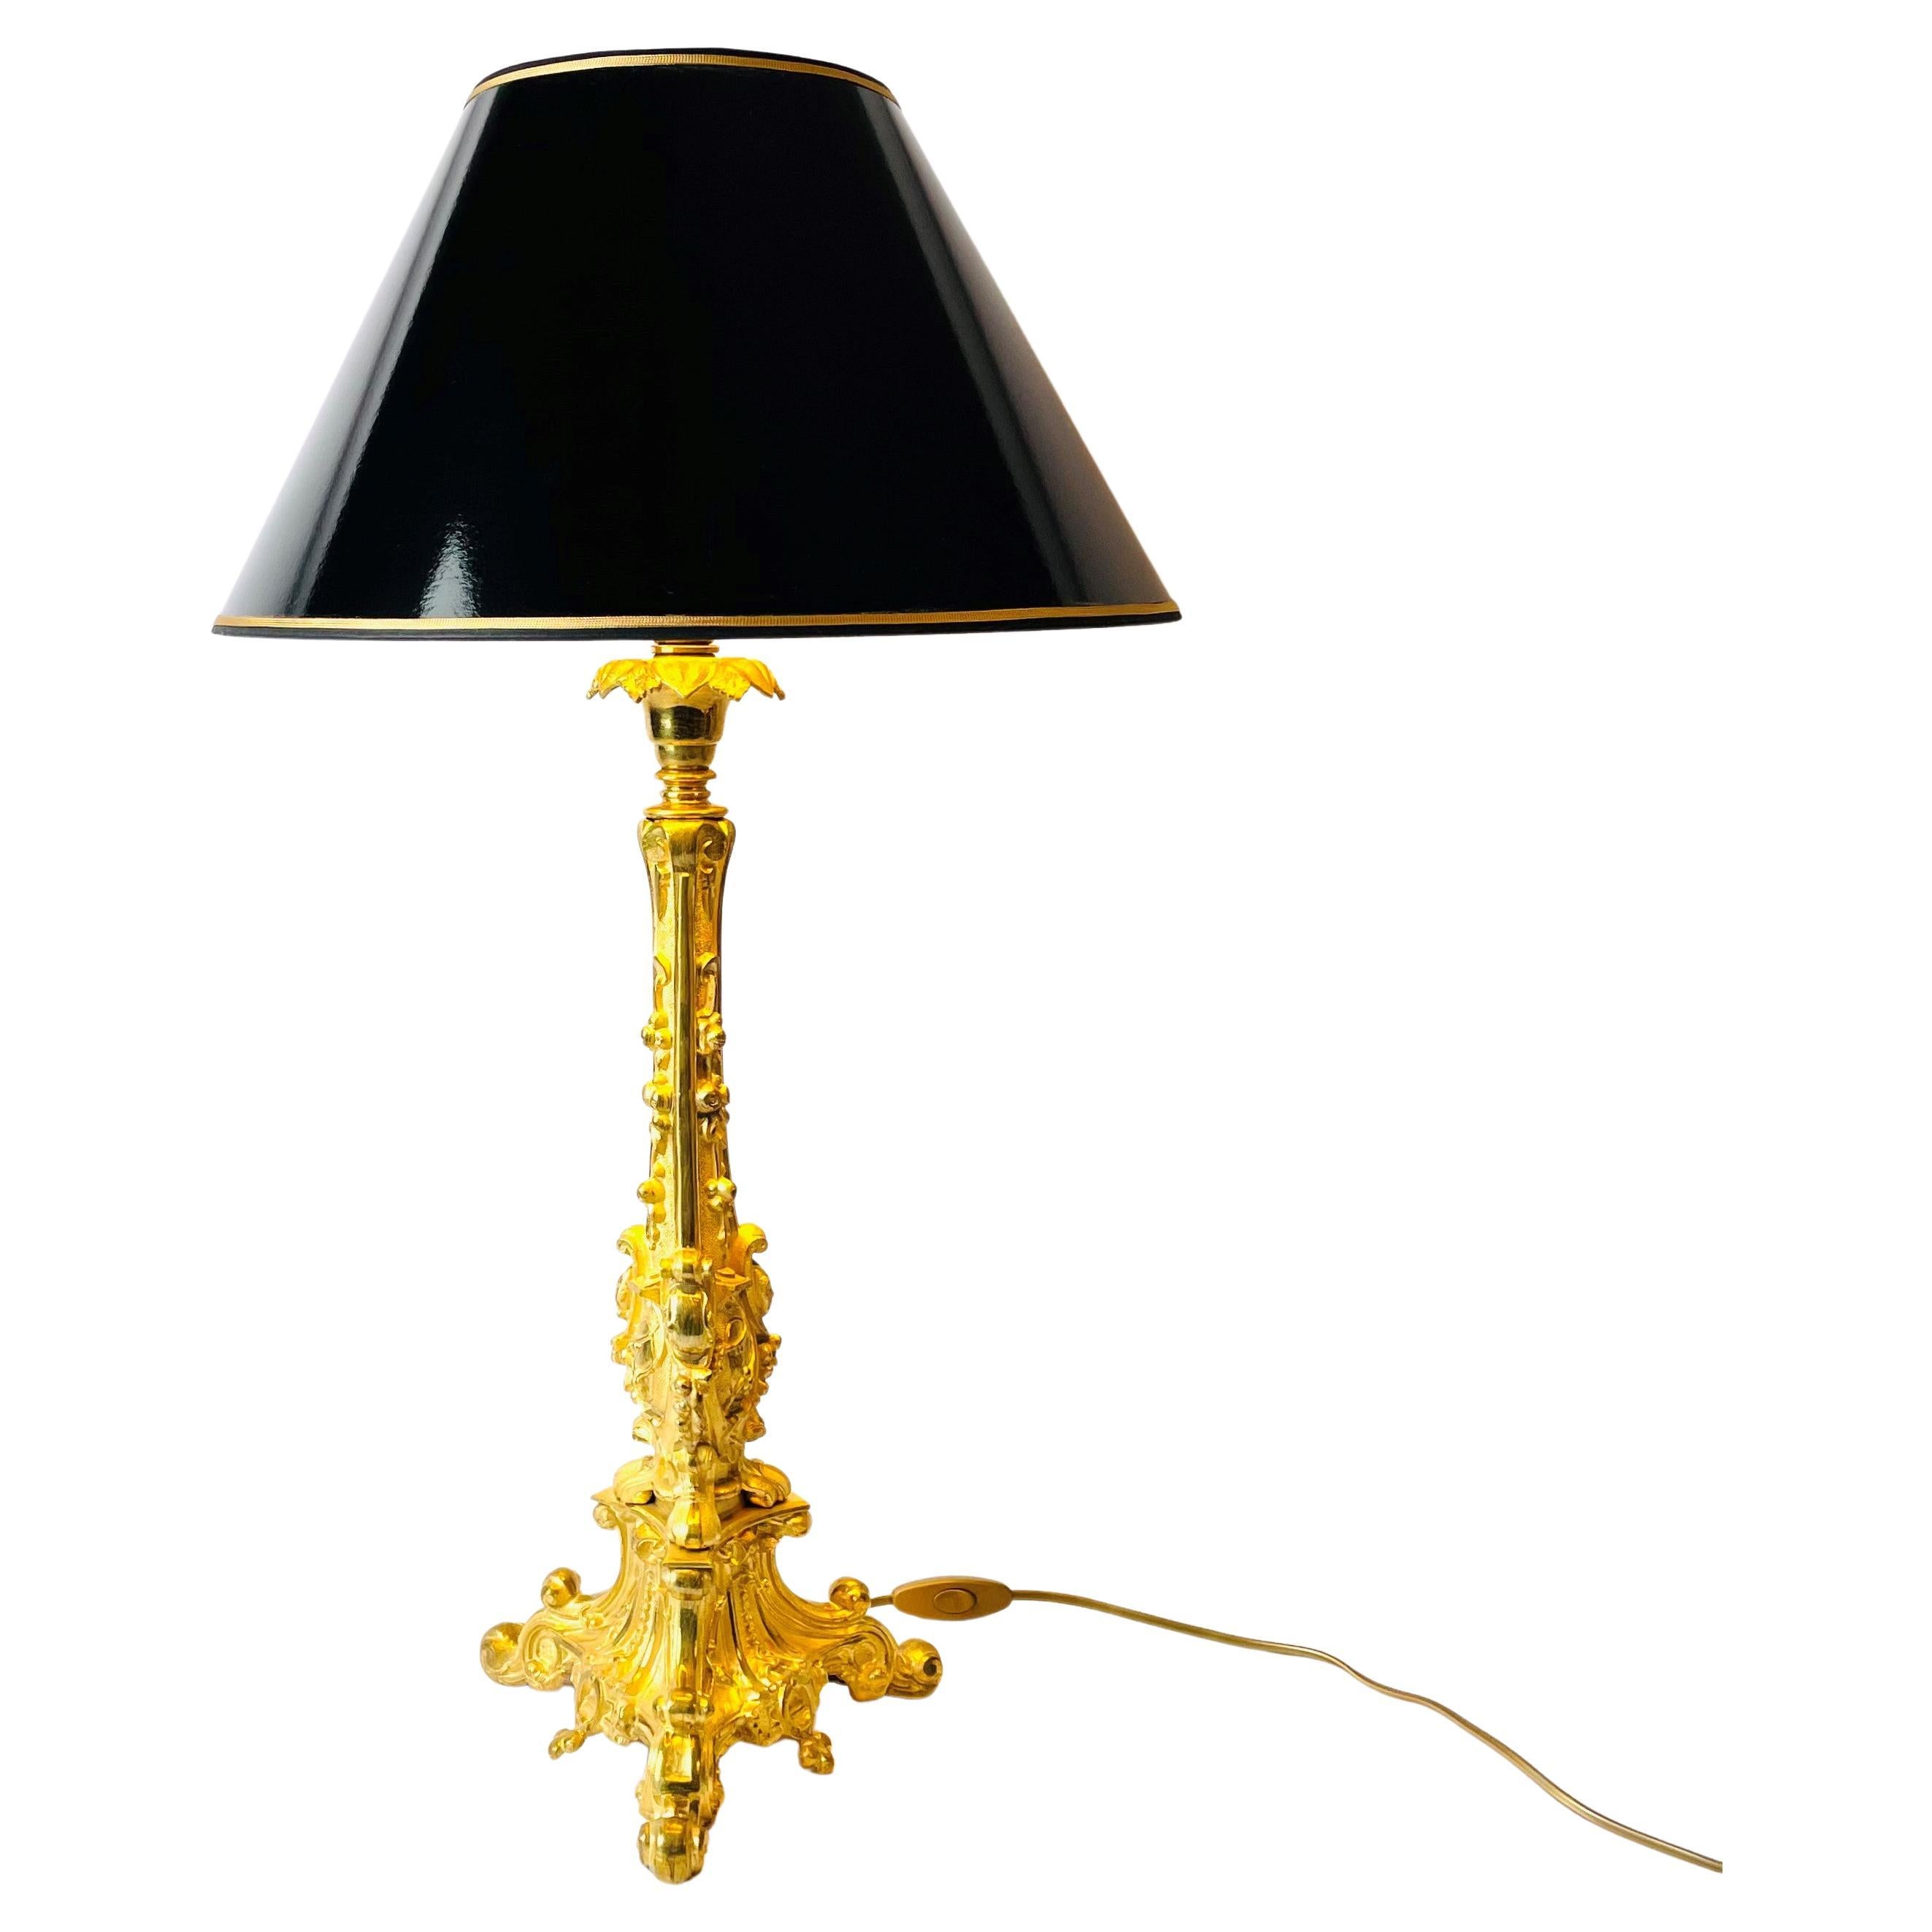 Large Rococo Revival Table Lamp in Gilded Bronze, Mid-19th Century For Sale